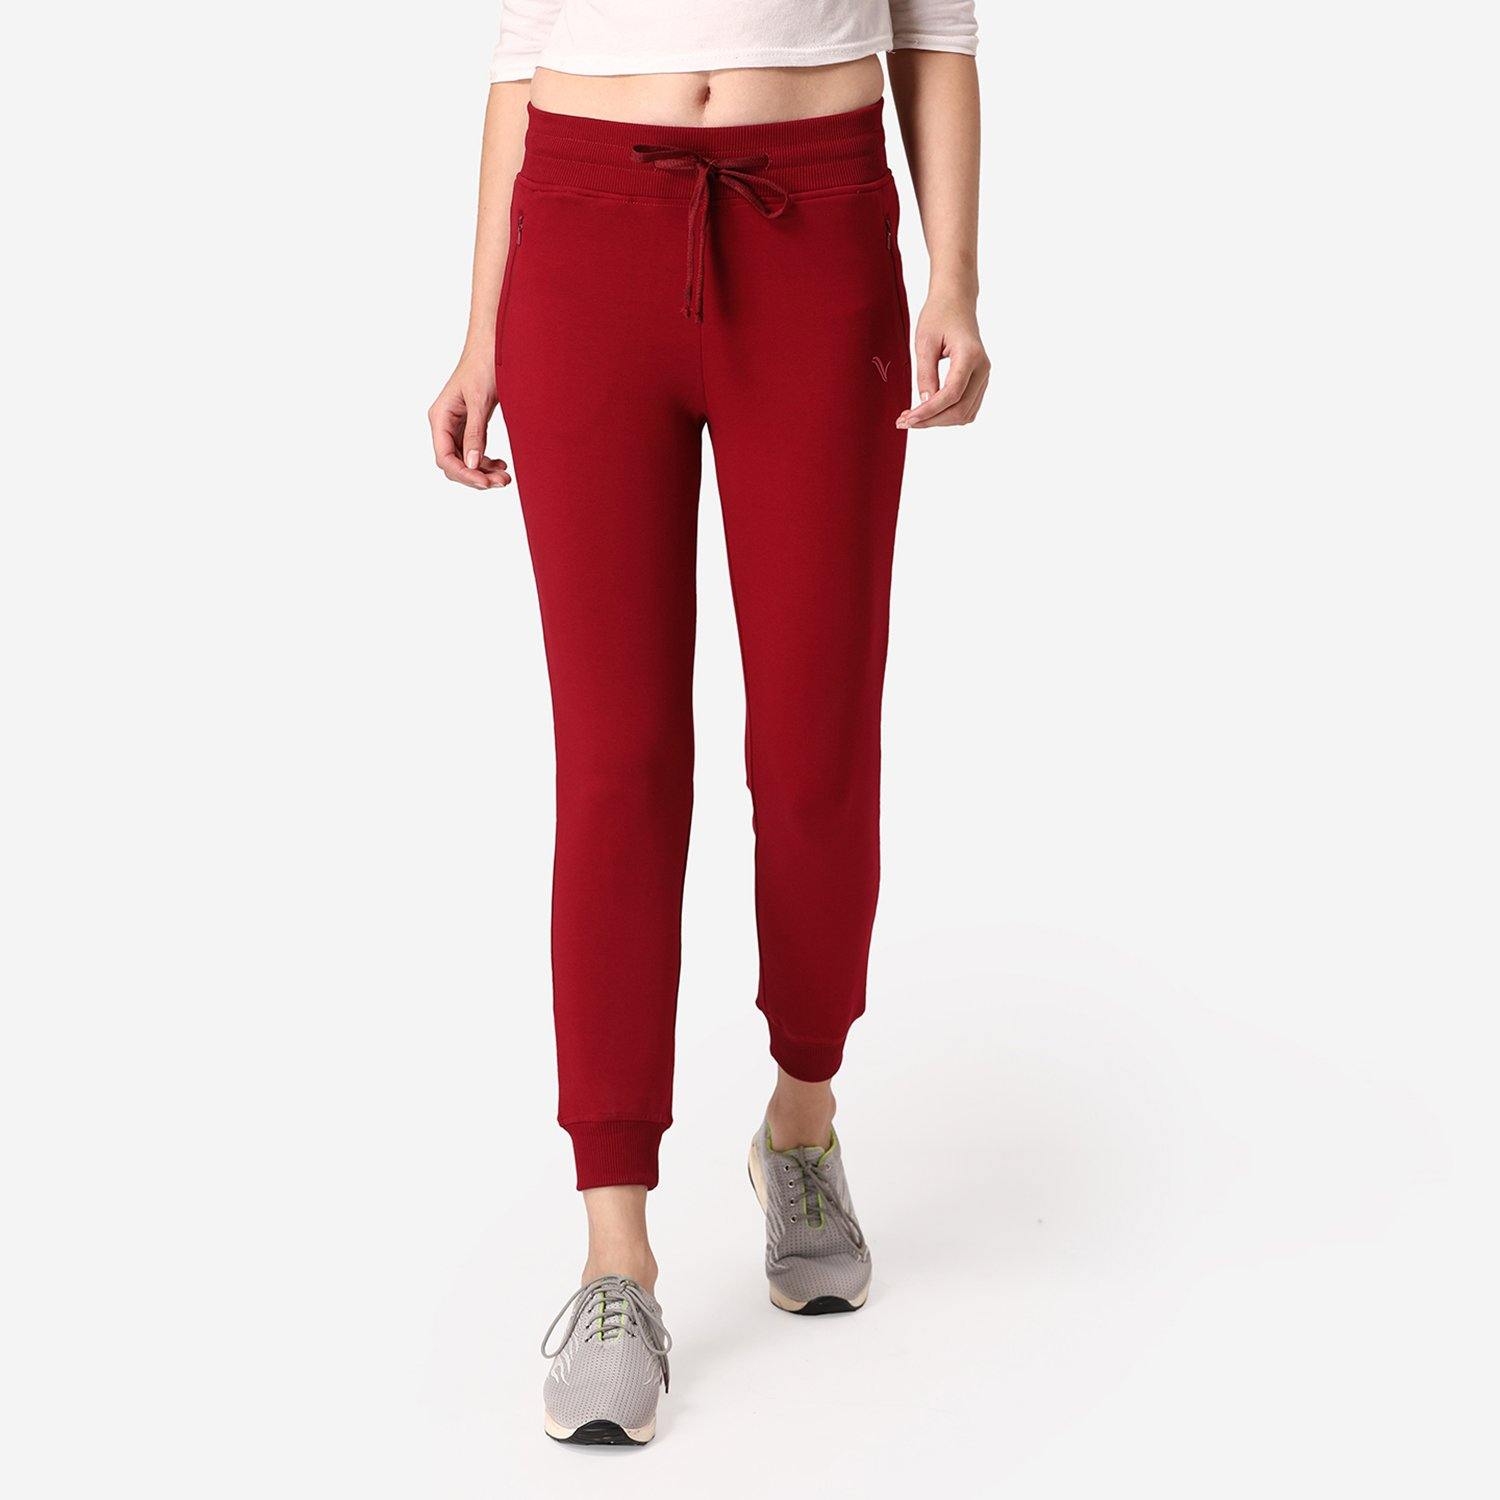 Men's Sweatpants Red Bolf XW01-A RED